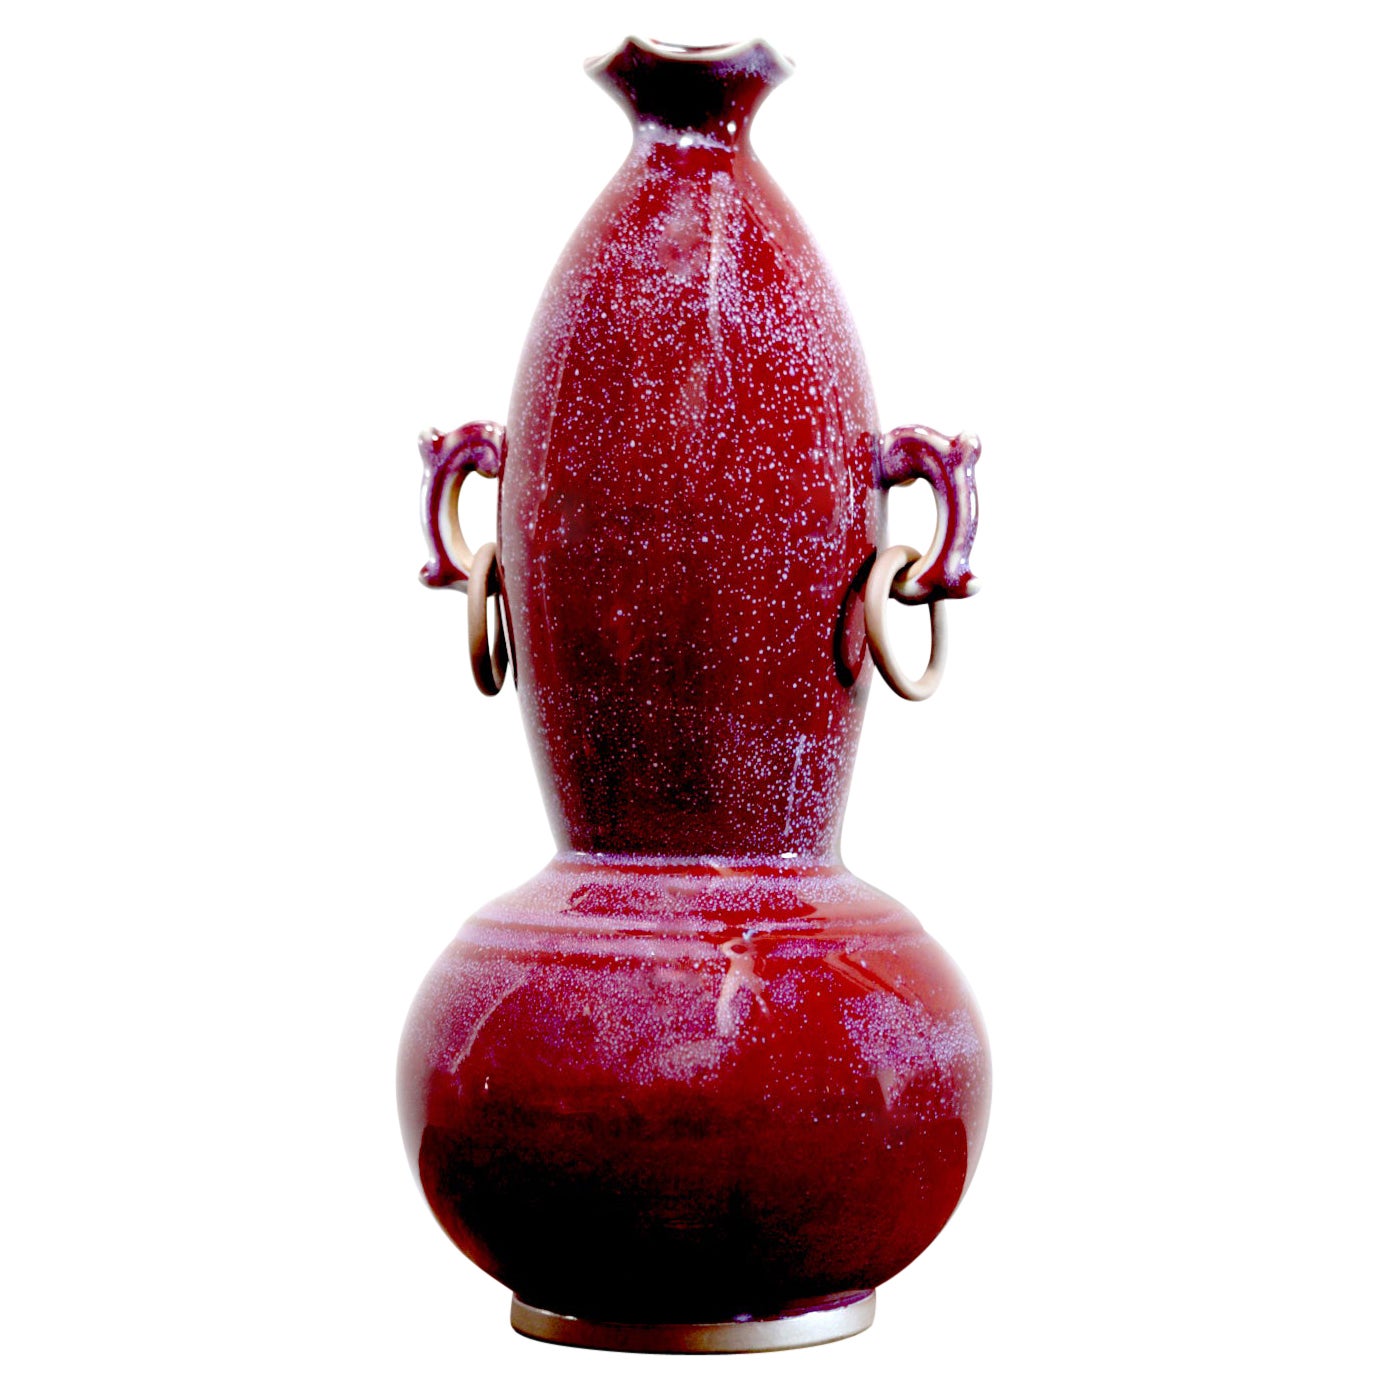 19th Century Rare Sang de Boeuf, Oxblood Gourd Vase with Ears, Copper Rings